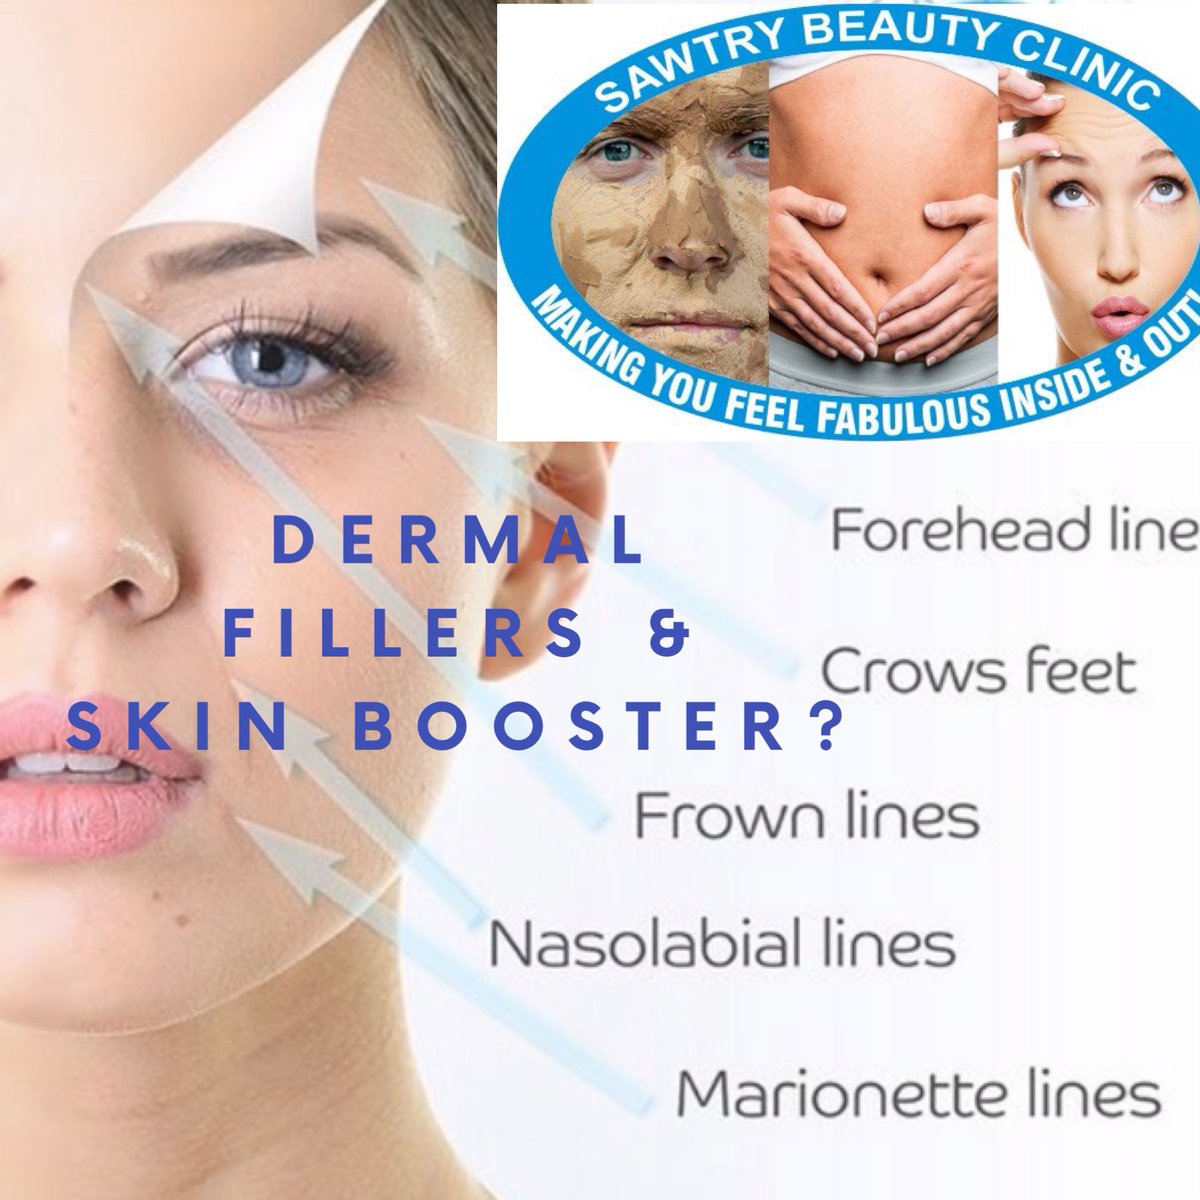 #Skinboosters improve hydration levels in the dermis reduce pore size, smooth out wrinkles & fine lines, lighten age spots gives youthful skin improved elasticity! #dermalfillers help to diminish facial lines & restore volume ,fullness in the face
#sawtry
#sawtrybeautyclinic